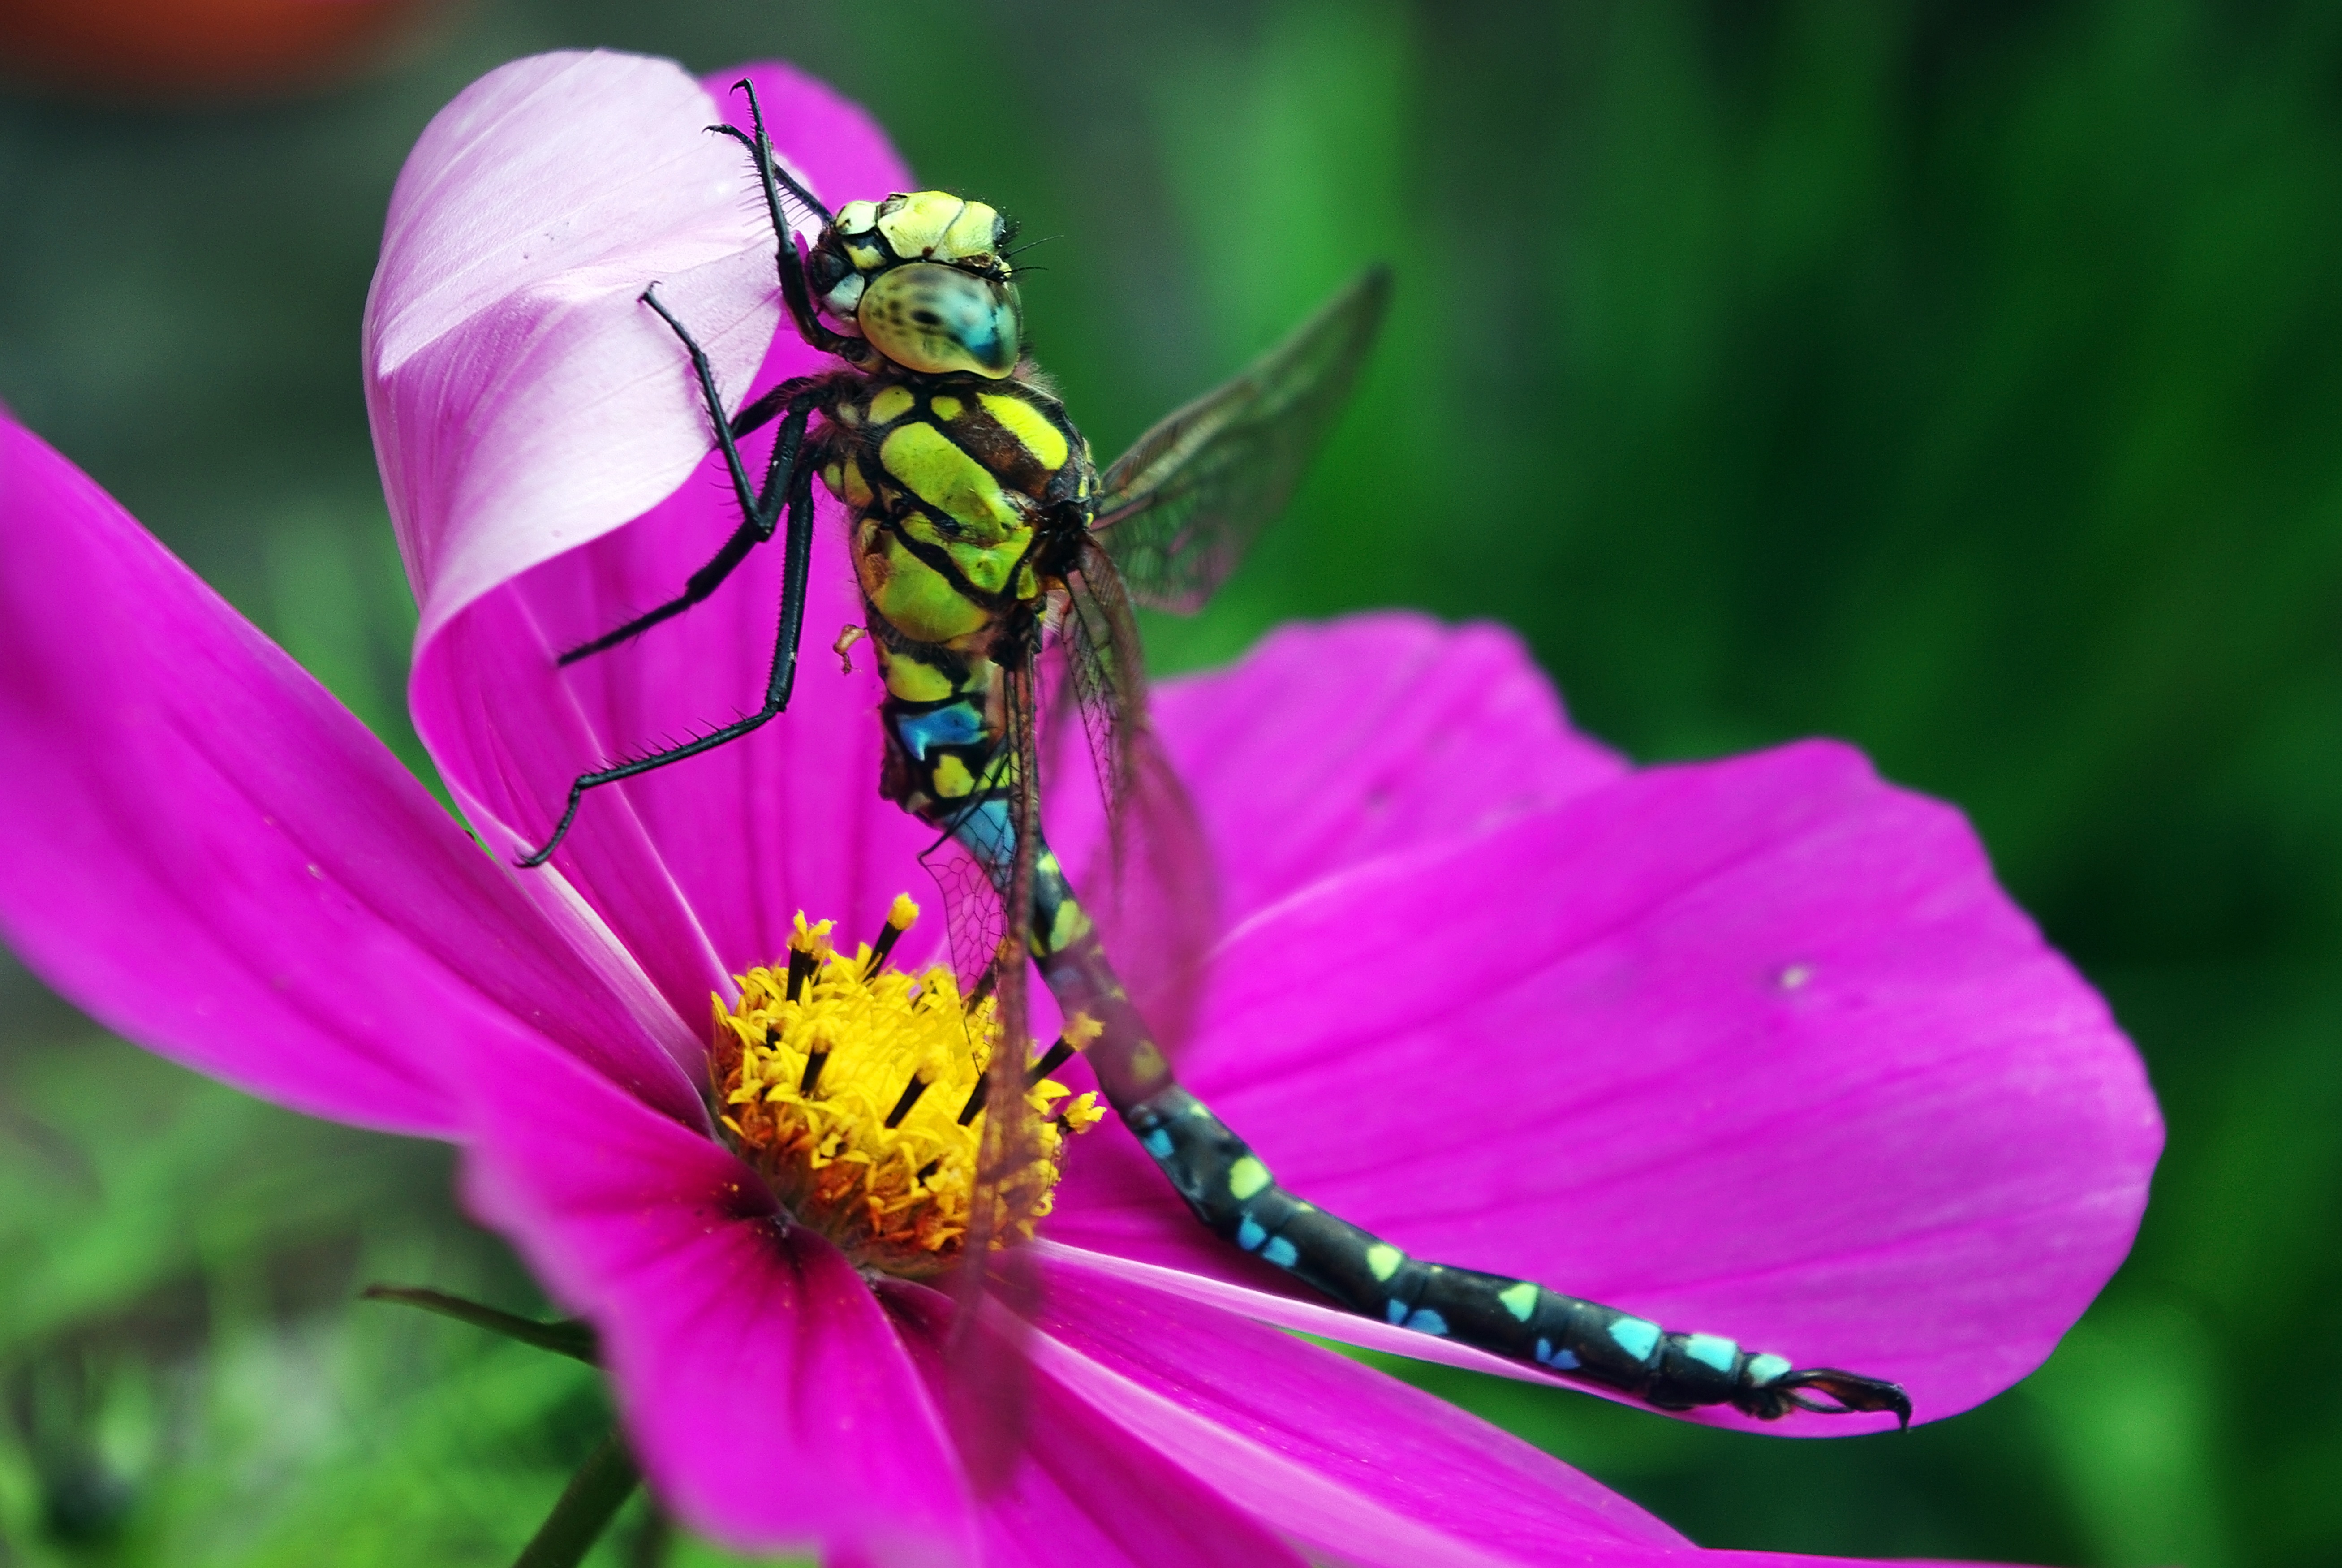 Dragonfly on the Flower, Blooming, Dragon, Dragonfly, Flower, HQ Photo